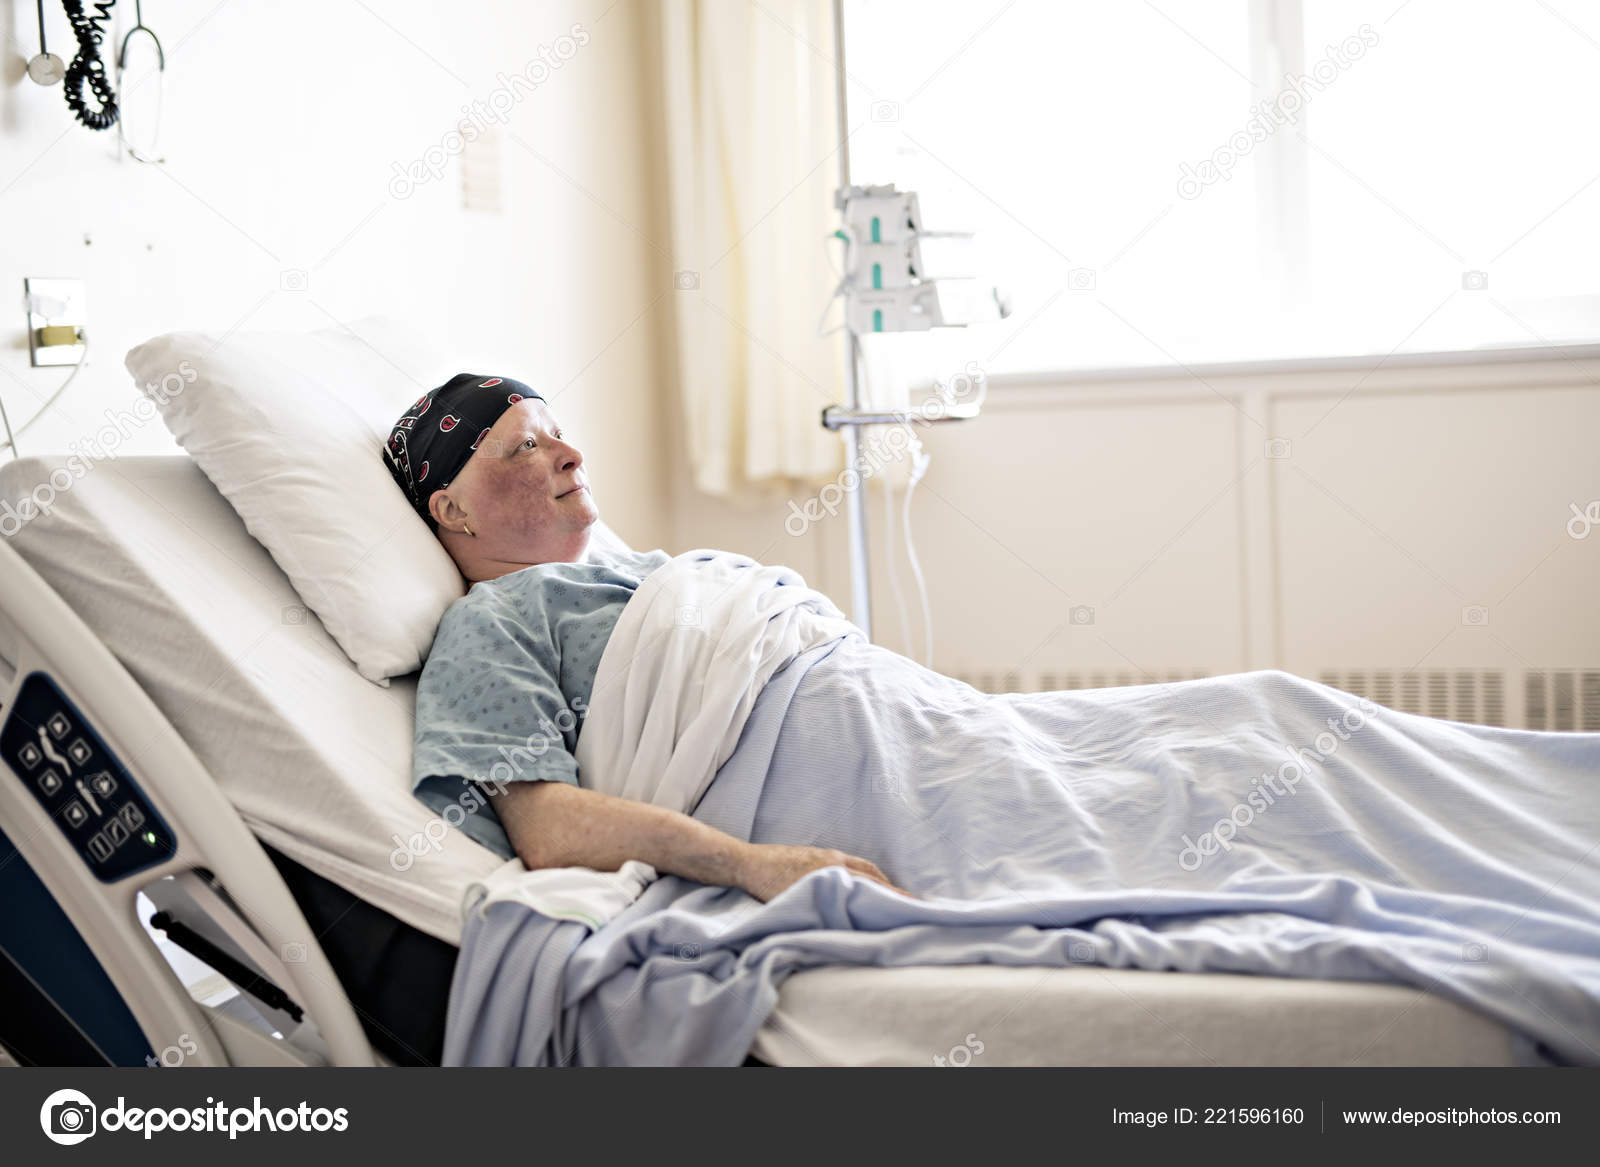 Woman Hospital Bed Suffering Cancer Stock Photo C Lopolo